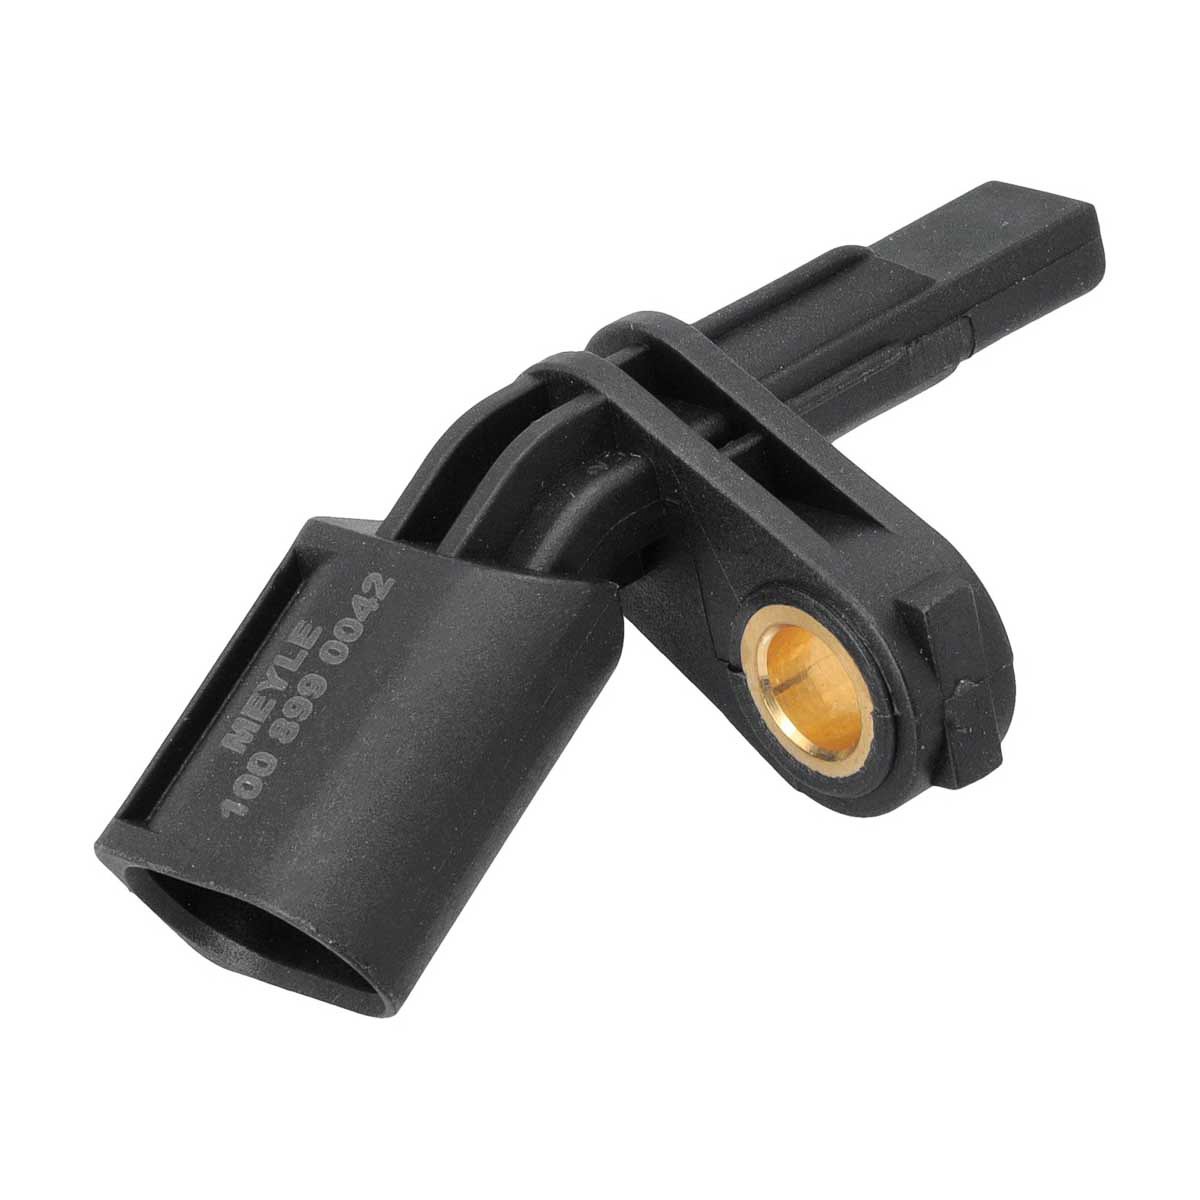 MEYLE 100 899 0042 ABS sensor without cable, ORIGINAL Quality, Active sensor, 2-pin connector